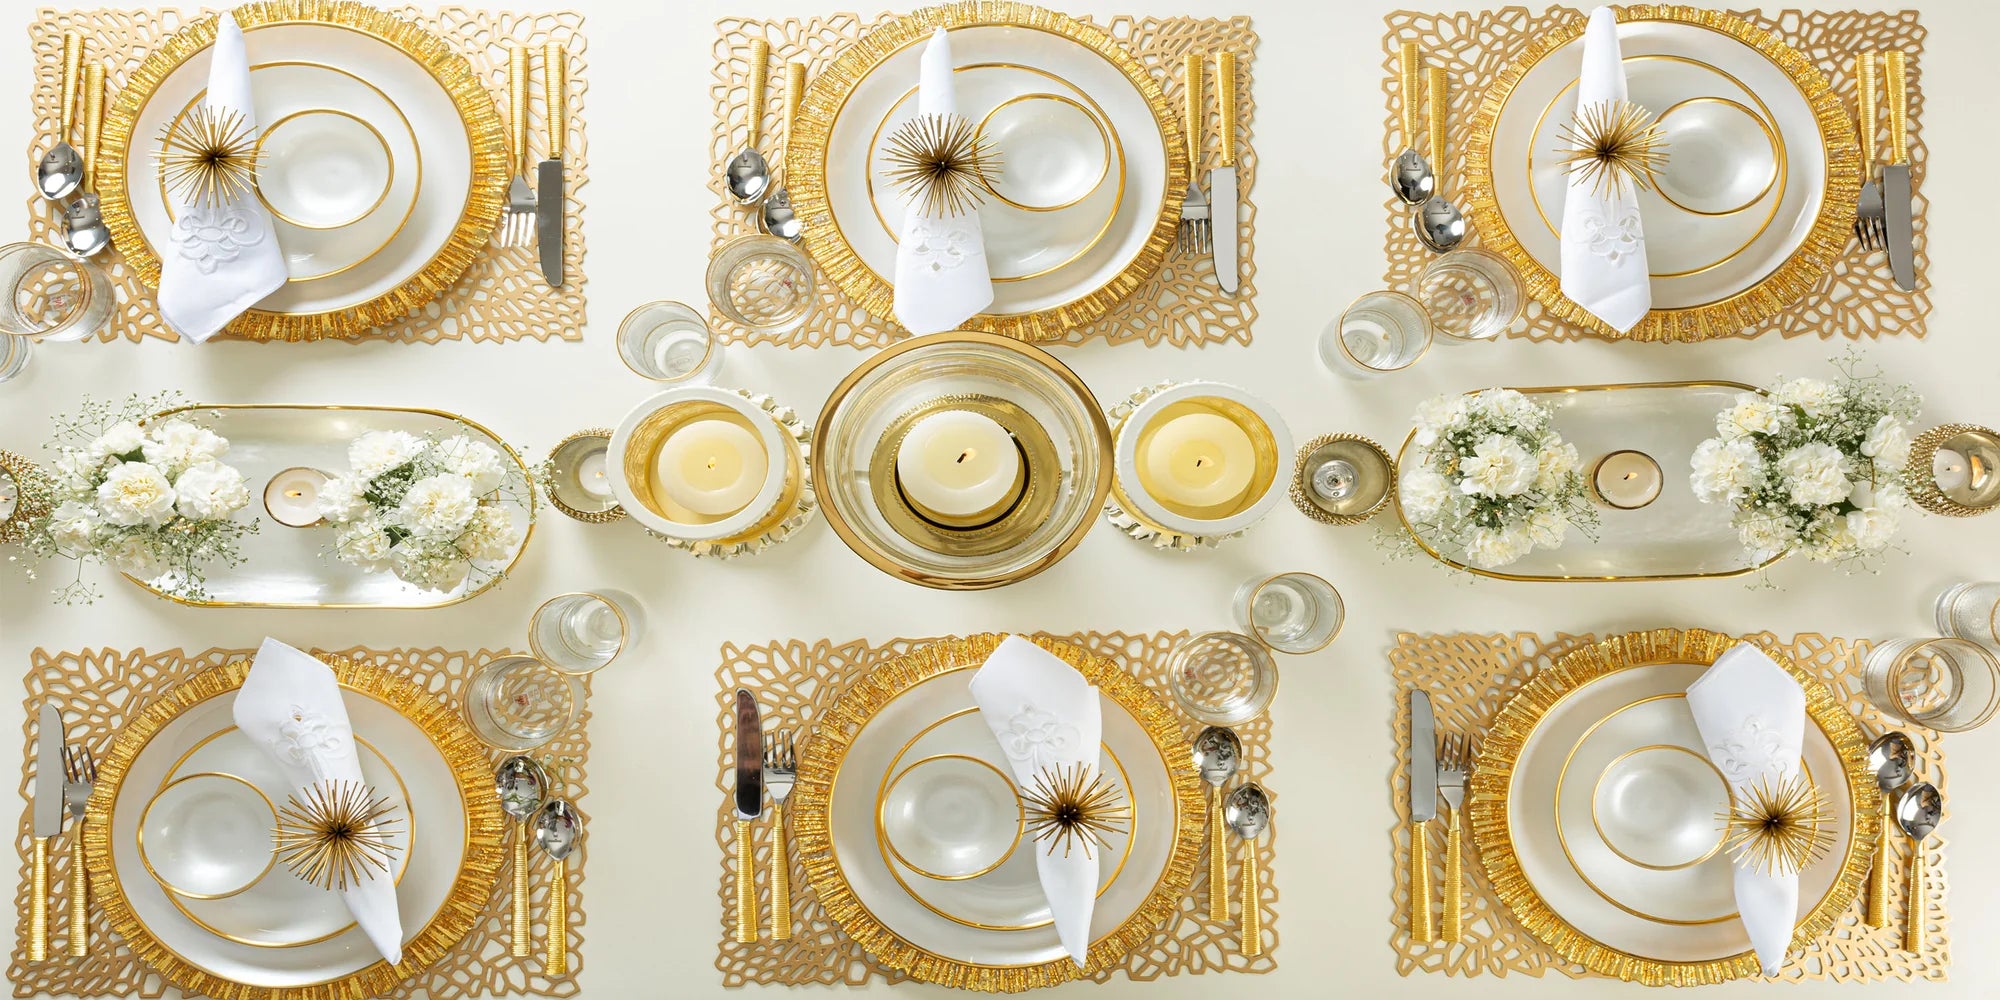 Want to Elevate Your Dining Experience? Explore Our Luxury Serveware Collection!